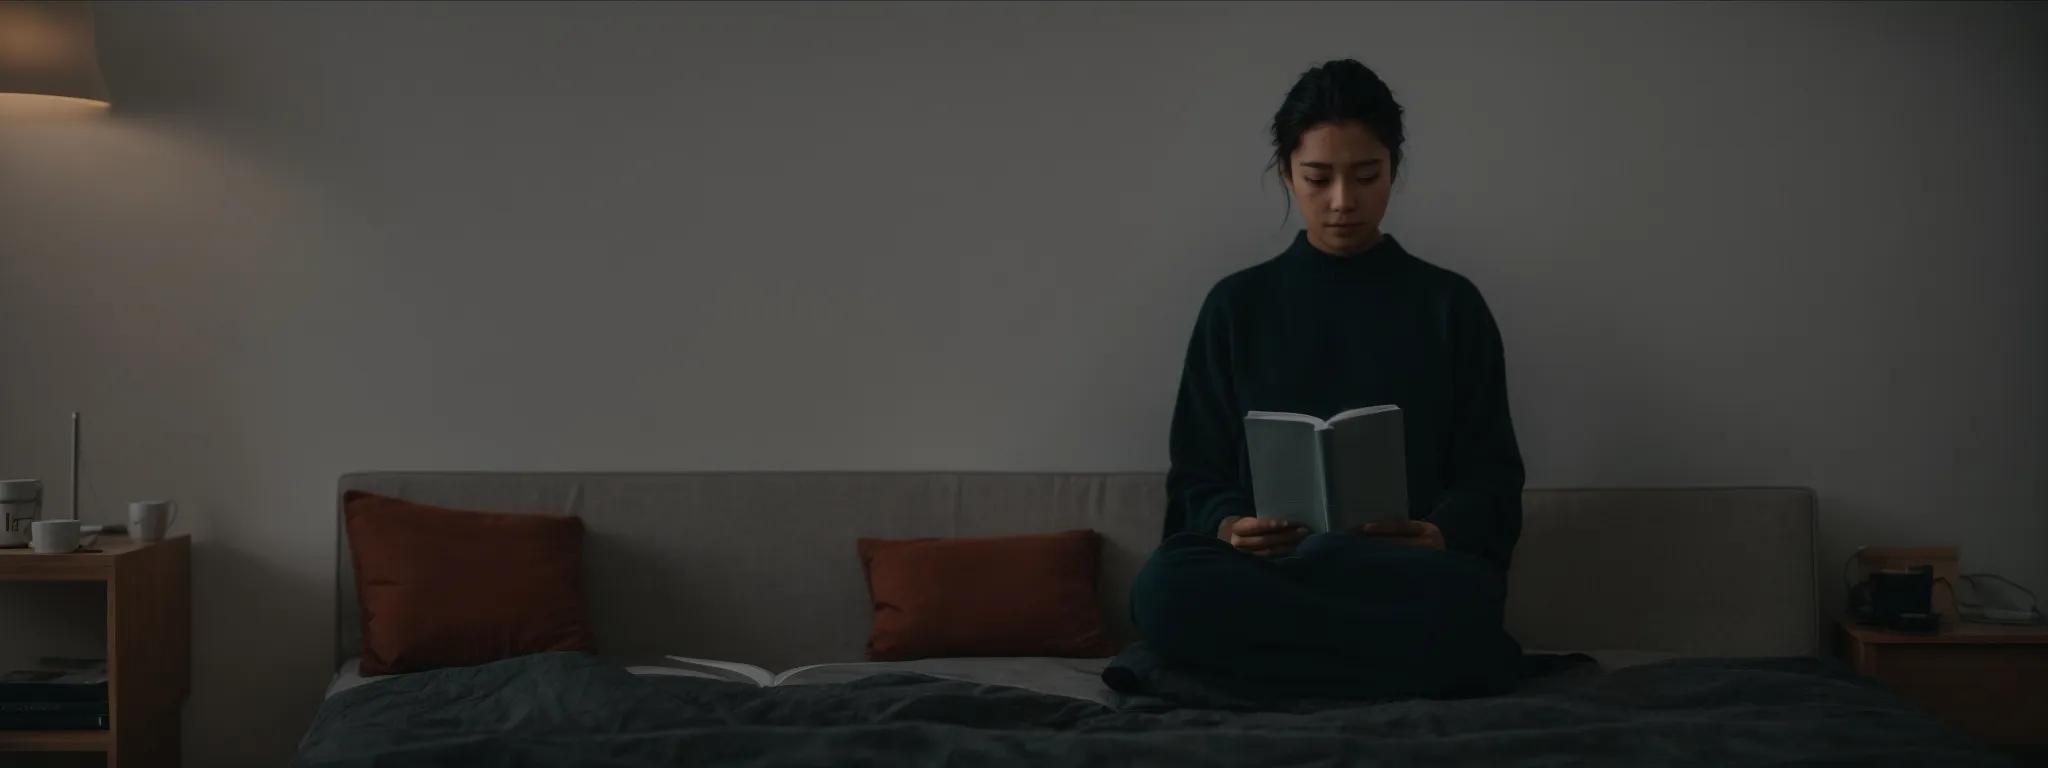 a person comfortably reading an illuminated e-book against a quiet, minimalist backdrop.